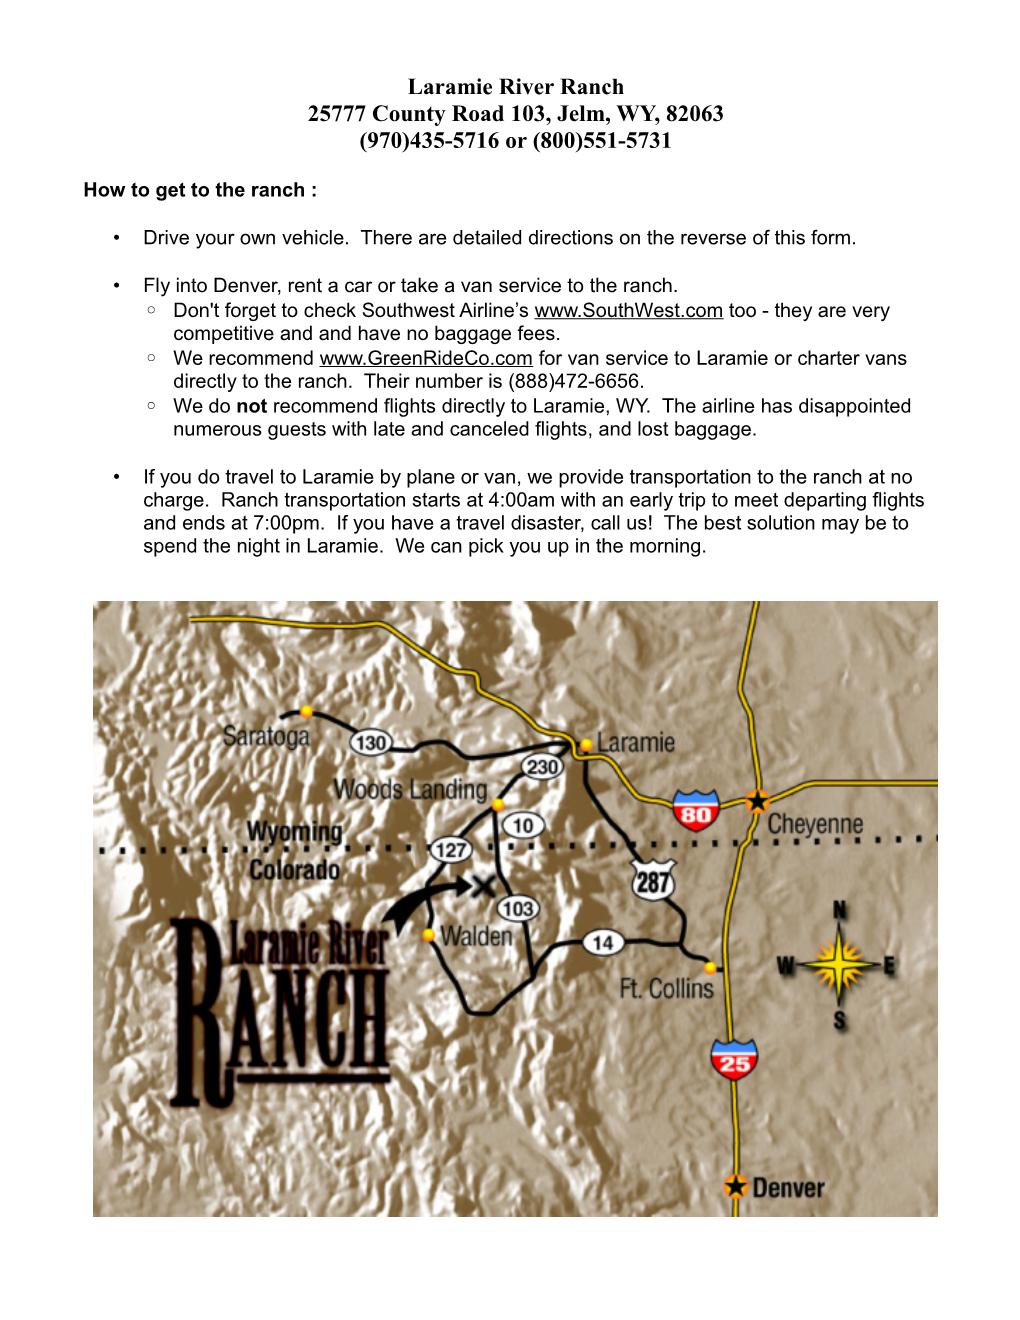 Laramie River Ranch 25777 County Road 103, Jelm, WY, 82063 (970)435-5716 Or (800)551-5731